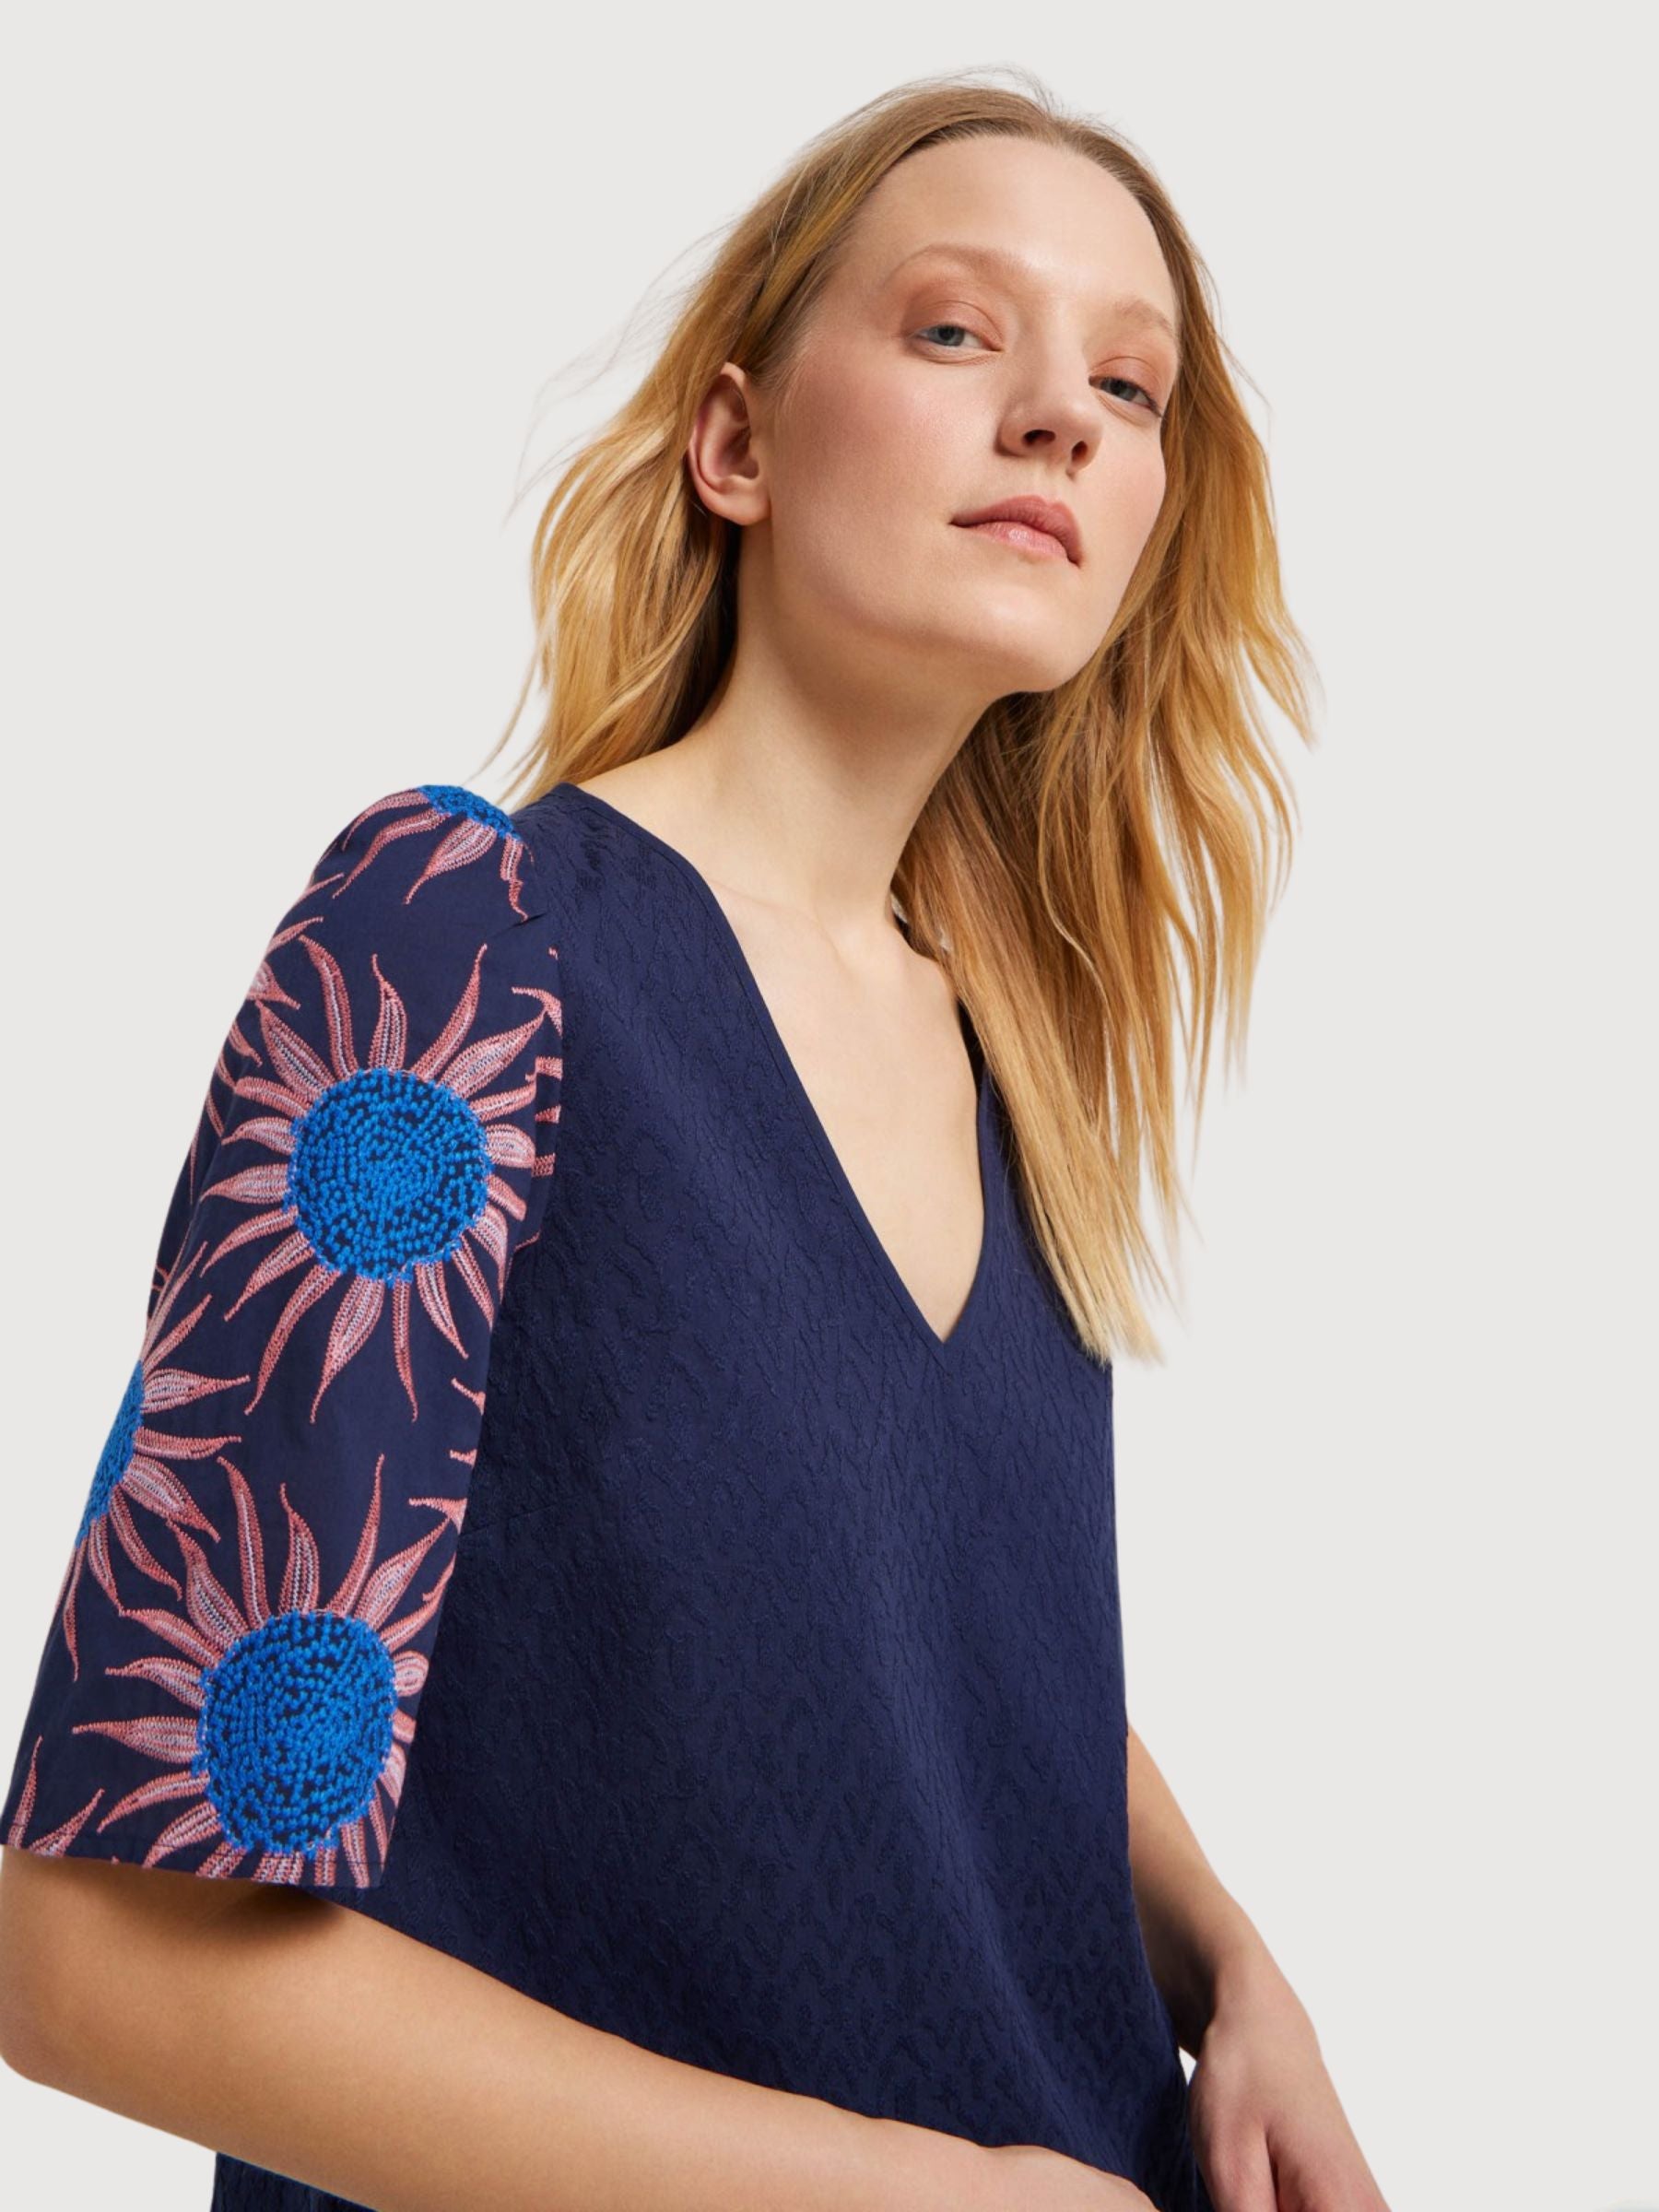 Night Blue Blouse with Embroidery | Lanius